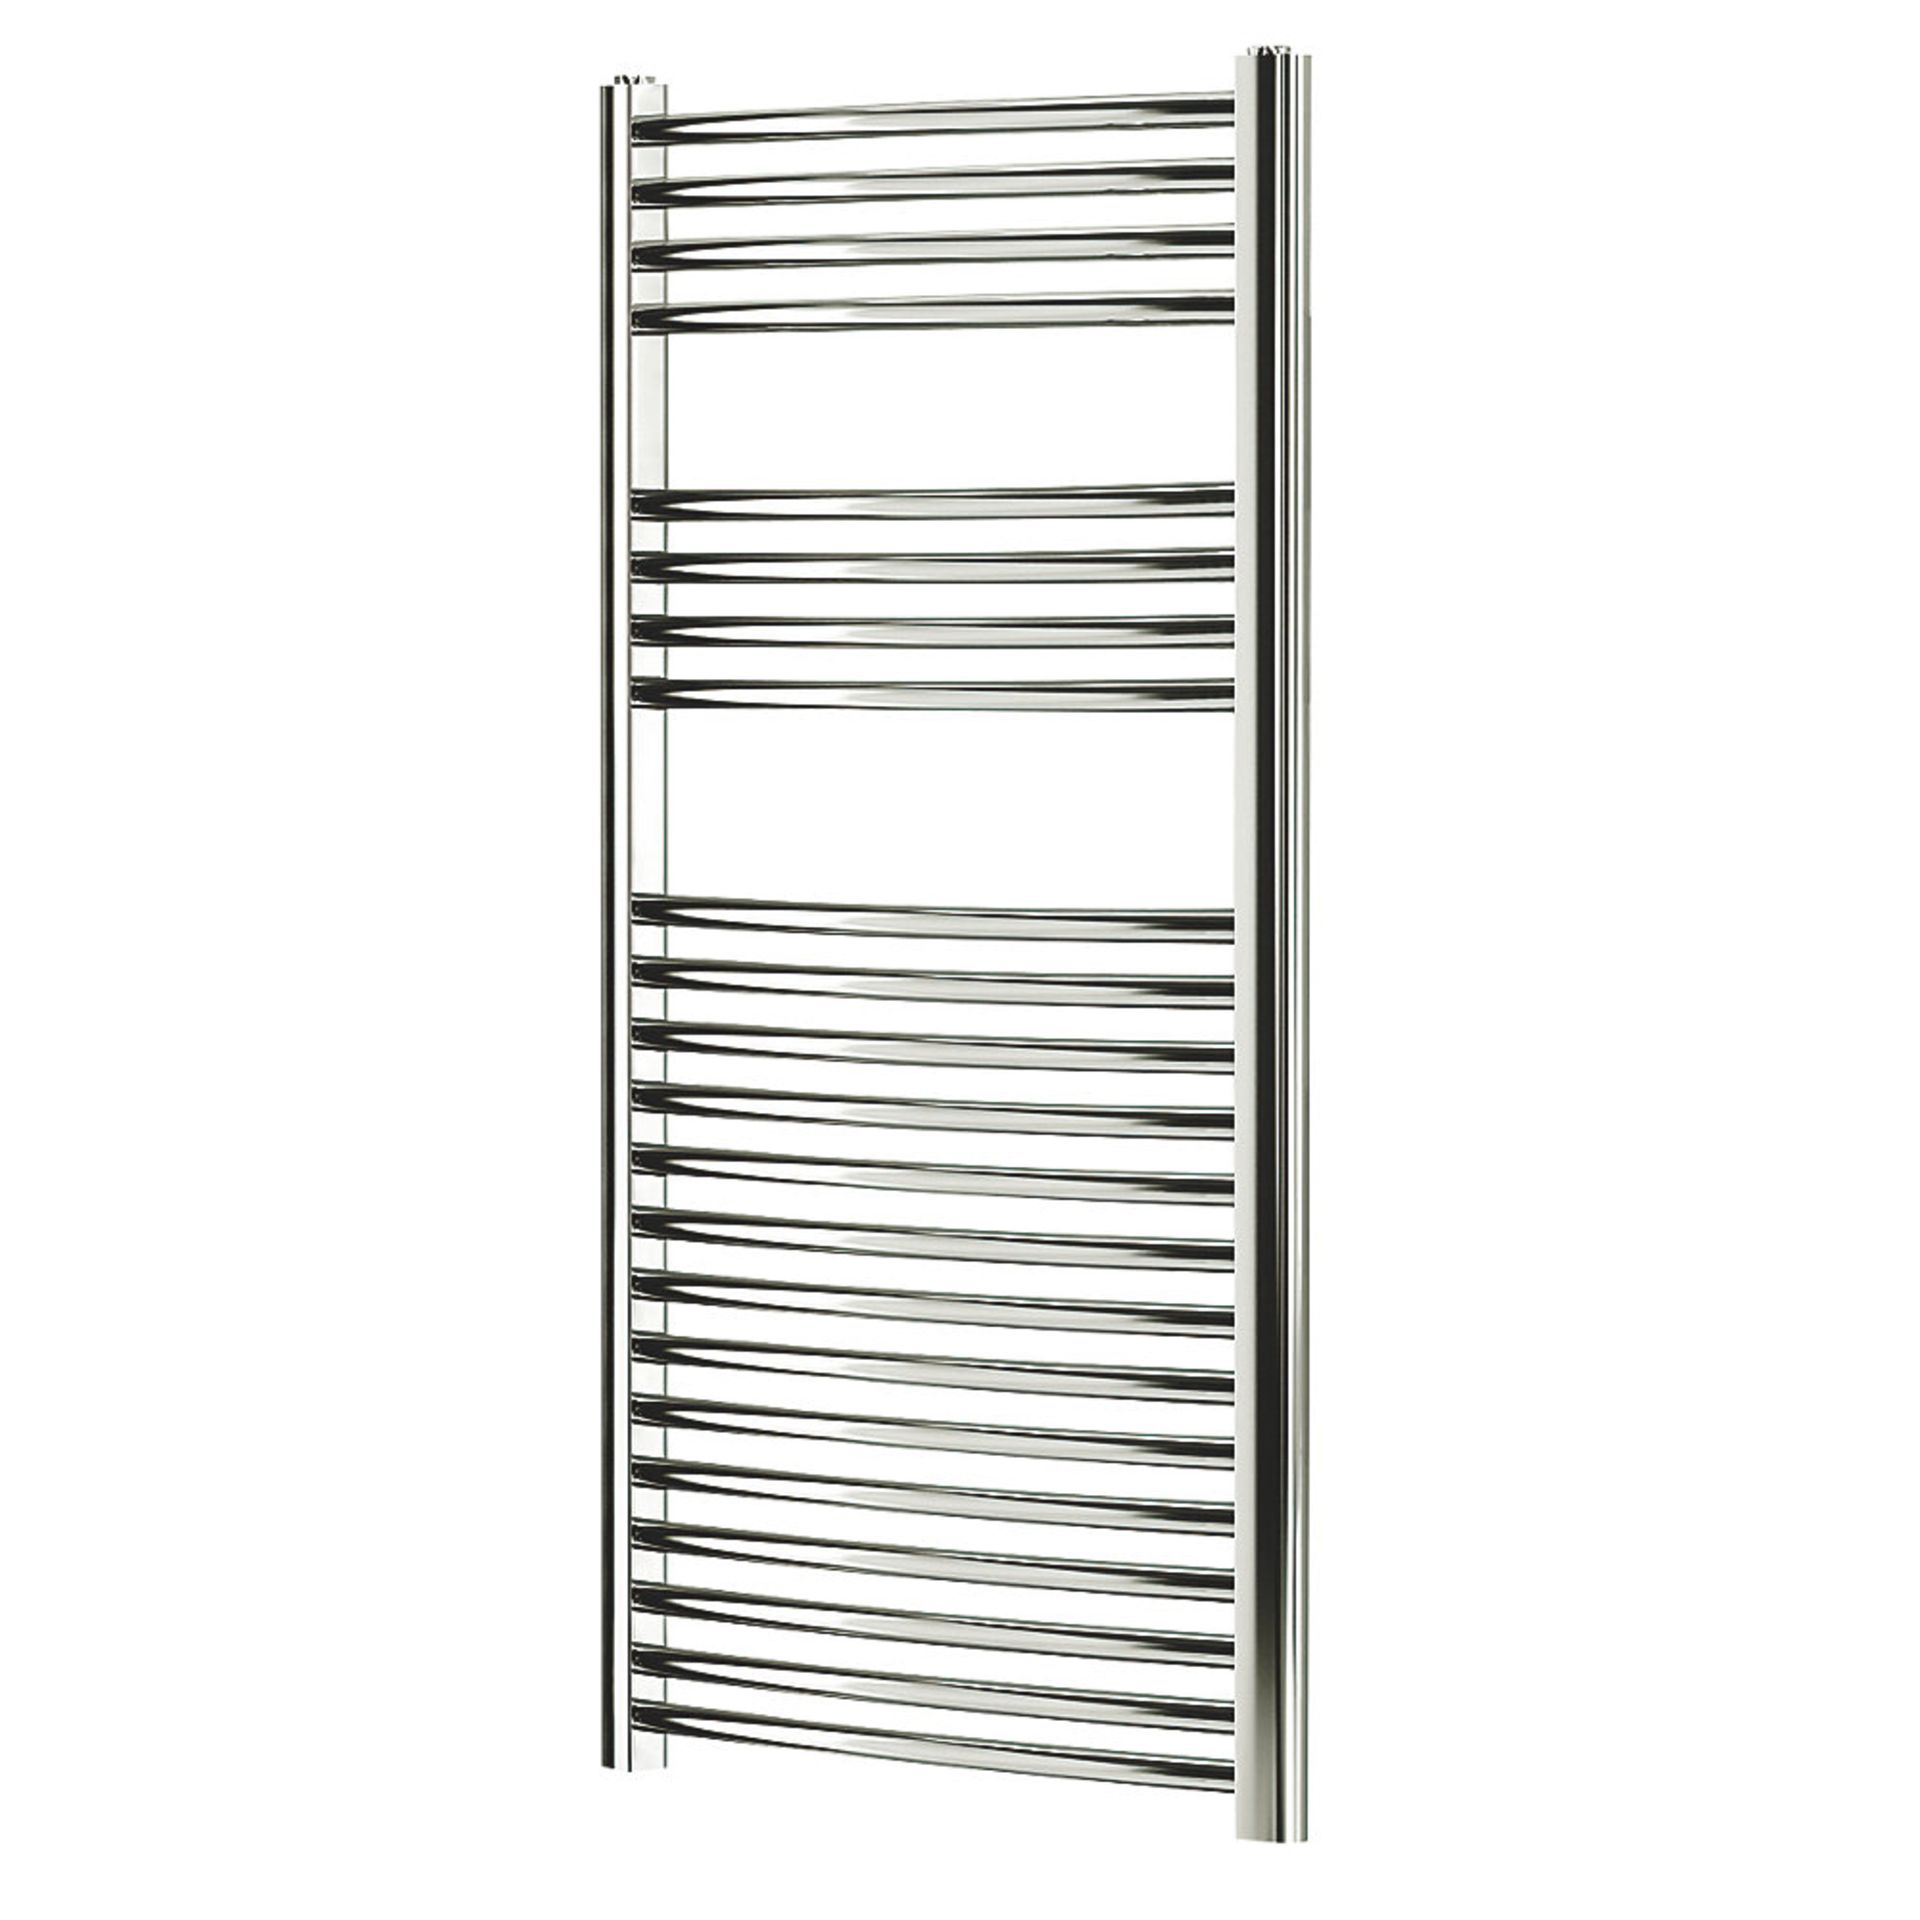 (MC186) 1100 X 450MM CURVED TOWEL RADIATOR CHROME. Curved Chrome-Plated Mild Steel Construction This - Image 2 of 2